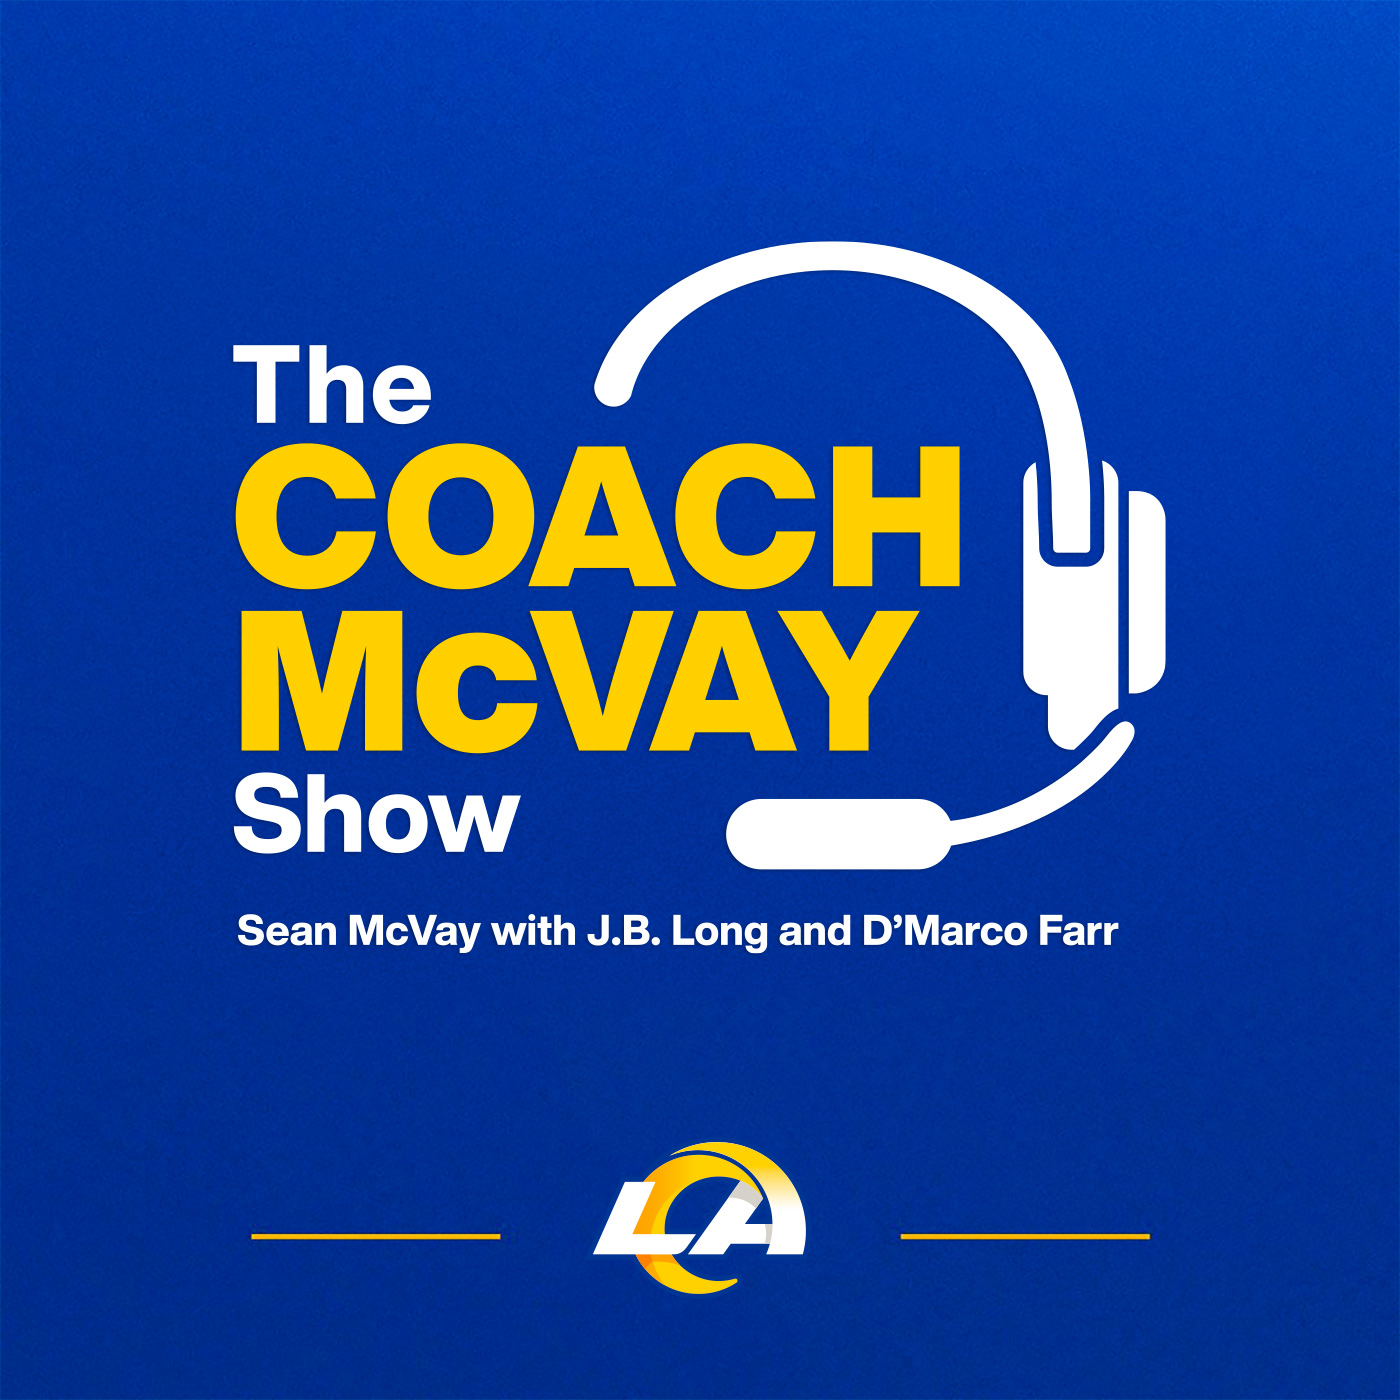 Ep. 22: Coach McVay breaks down Sunday's 49ers matchup & how the team can respond to adversity